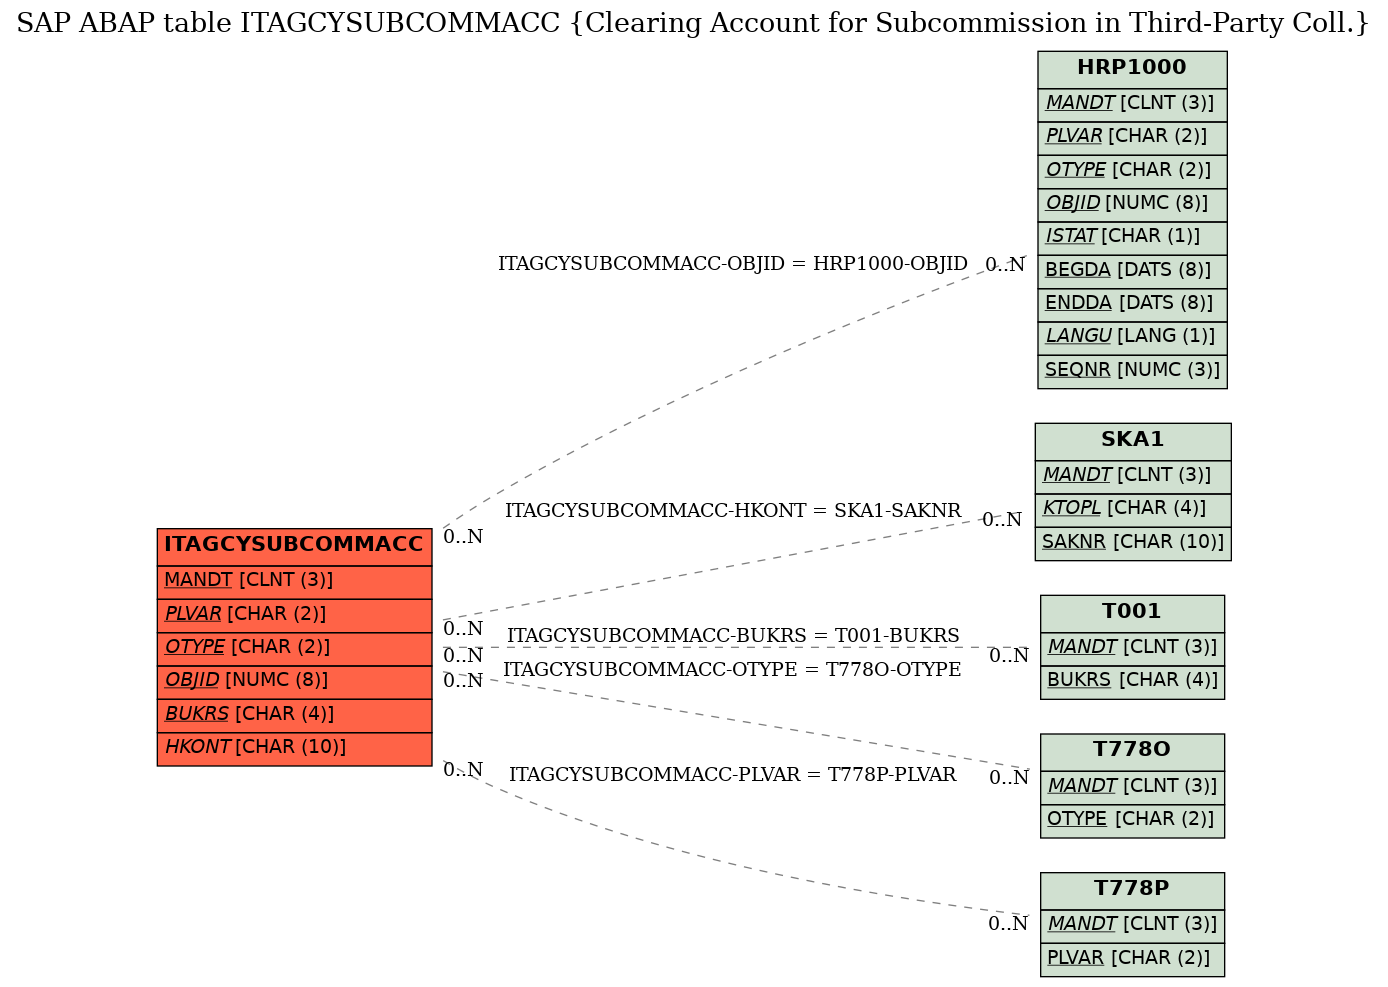 E-R Diagram for table ITAGCYSUBCOMMACC (Clearing Account for Subcommission in Third-Party Coll.)